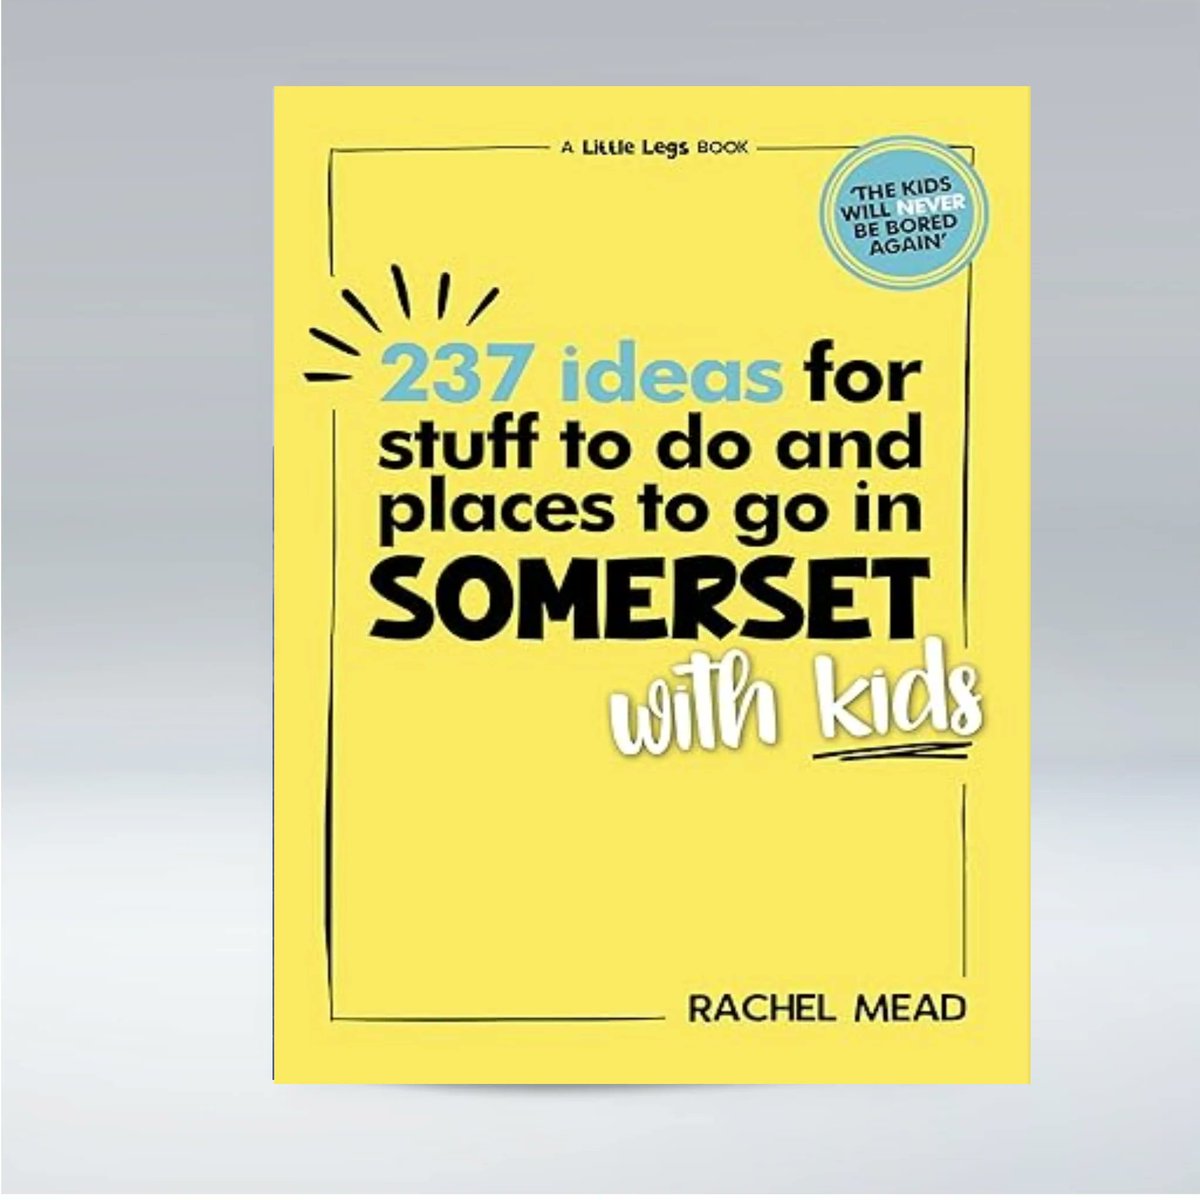 Just arrived at our @ExmoorNP centres... '237 ideas for stuff to do and places to go in Somerset (with kids)' by Rachel Mead. £14.99. Also available from our online shop: shop.exmoor-nationalpark.gov.uk/collections/ex… #Exmoor @VisitSomerset @Giles_Adams @visitexmoor @quantockhills @Dunster_Info